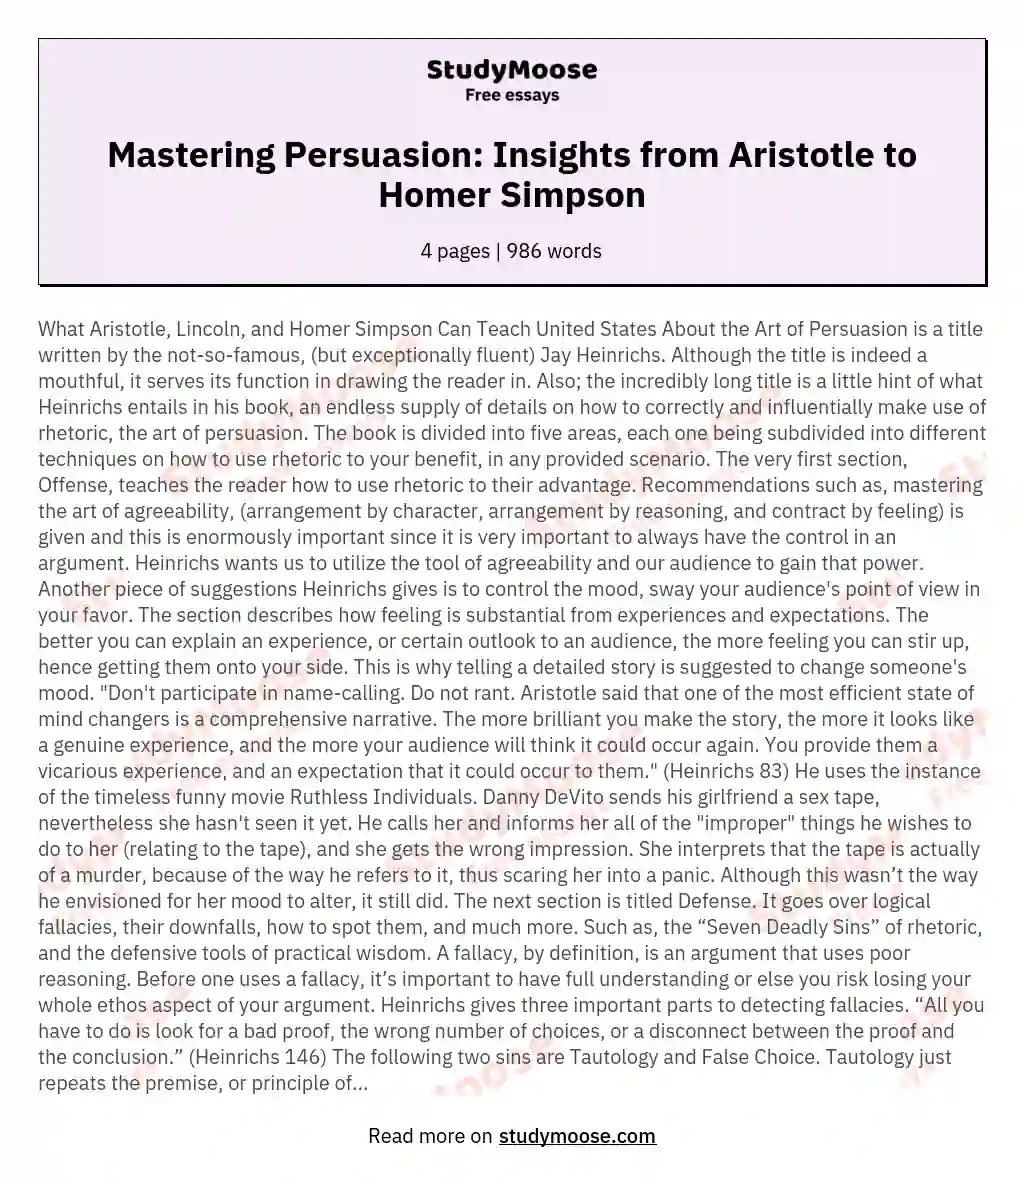 Mastering Persuasion: Insights from Aristotle to Homer Simpson essay